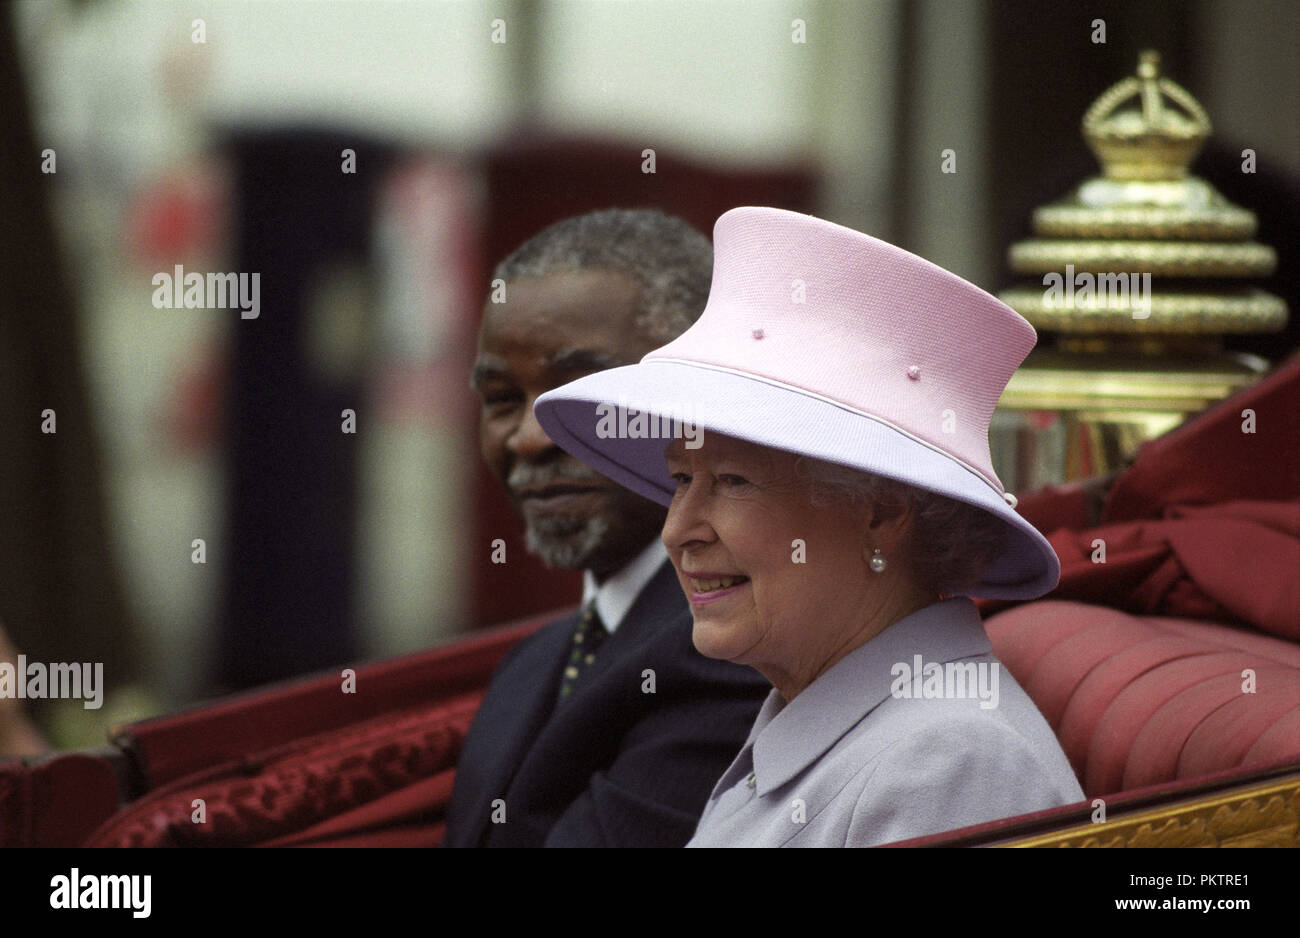 The State Visit of Mr Thabo Mbeki, President of South Africa, to Windsor with HM Queen Elizabeth II on 12th June 2001 Stock Photo